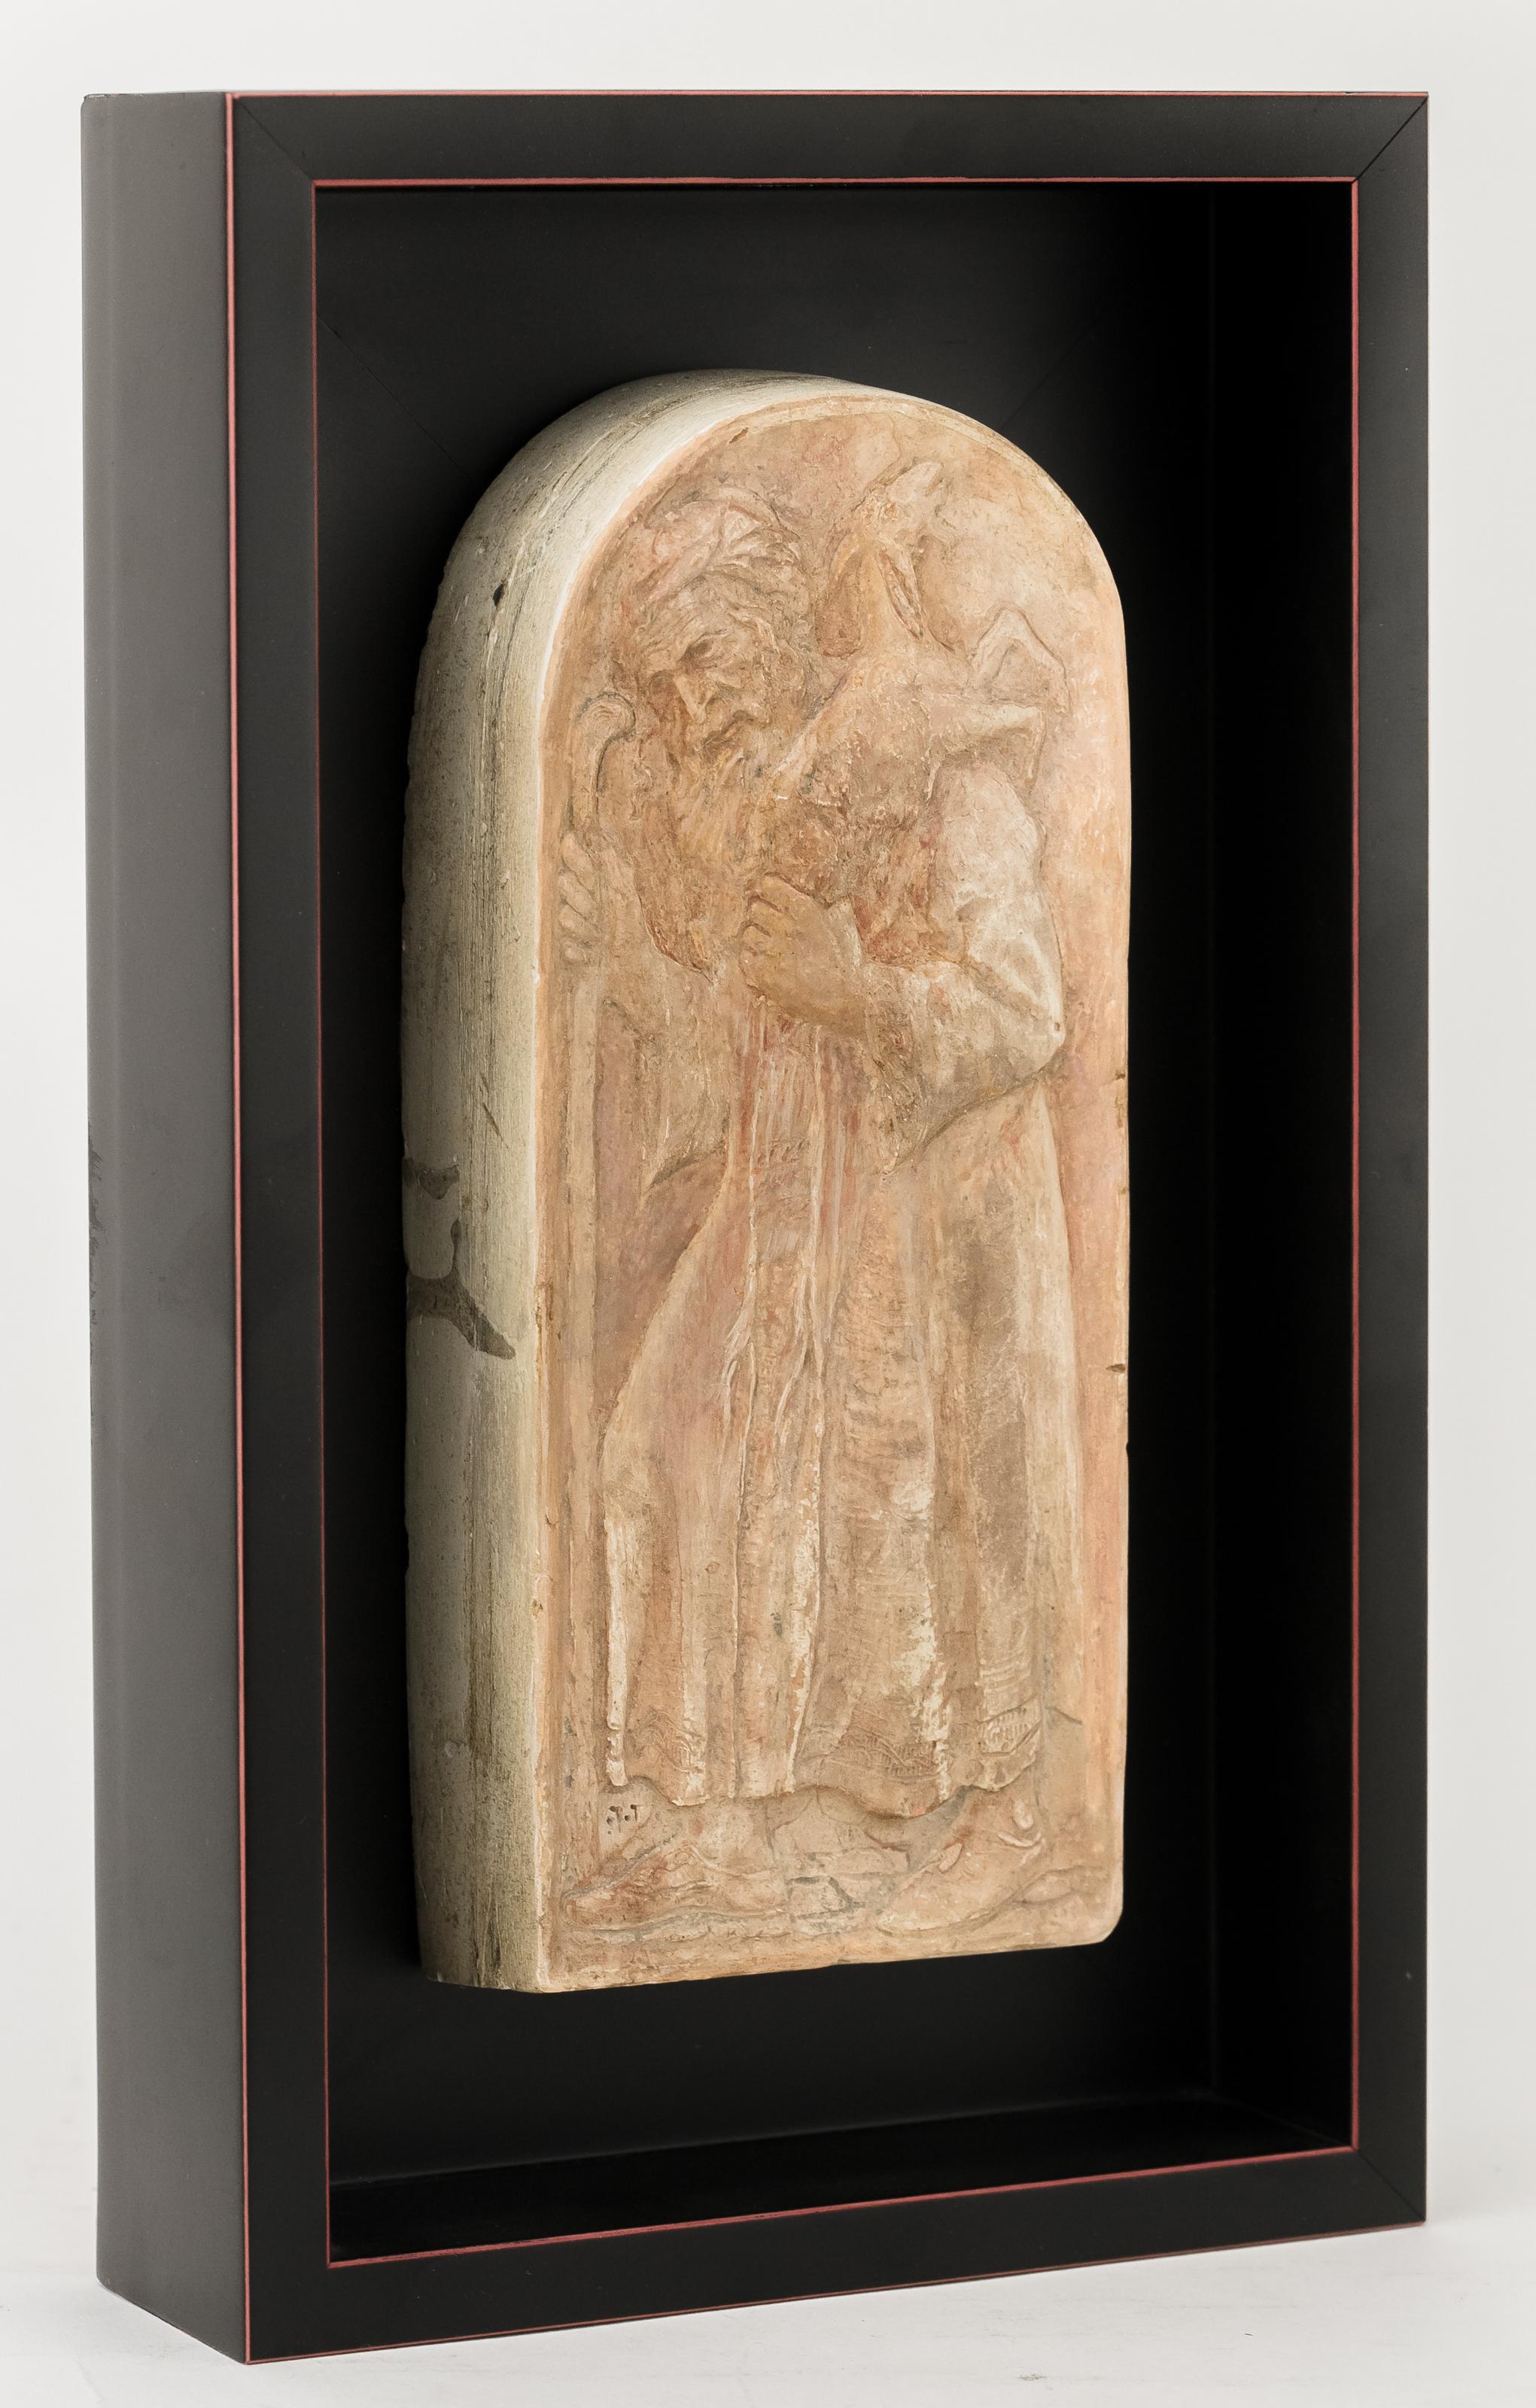 Ze’ev Raban plaster -plaque made in Bezalel School, Jerusalem
This image is of the “father who bought the goat for two zuzim”. Designed by Ze’ev Raban, made circa 1915-1920. Signed with the Hebrew initials “Z.R.”. 
This plaque depicts a scene from